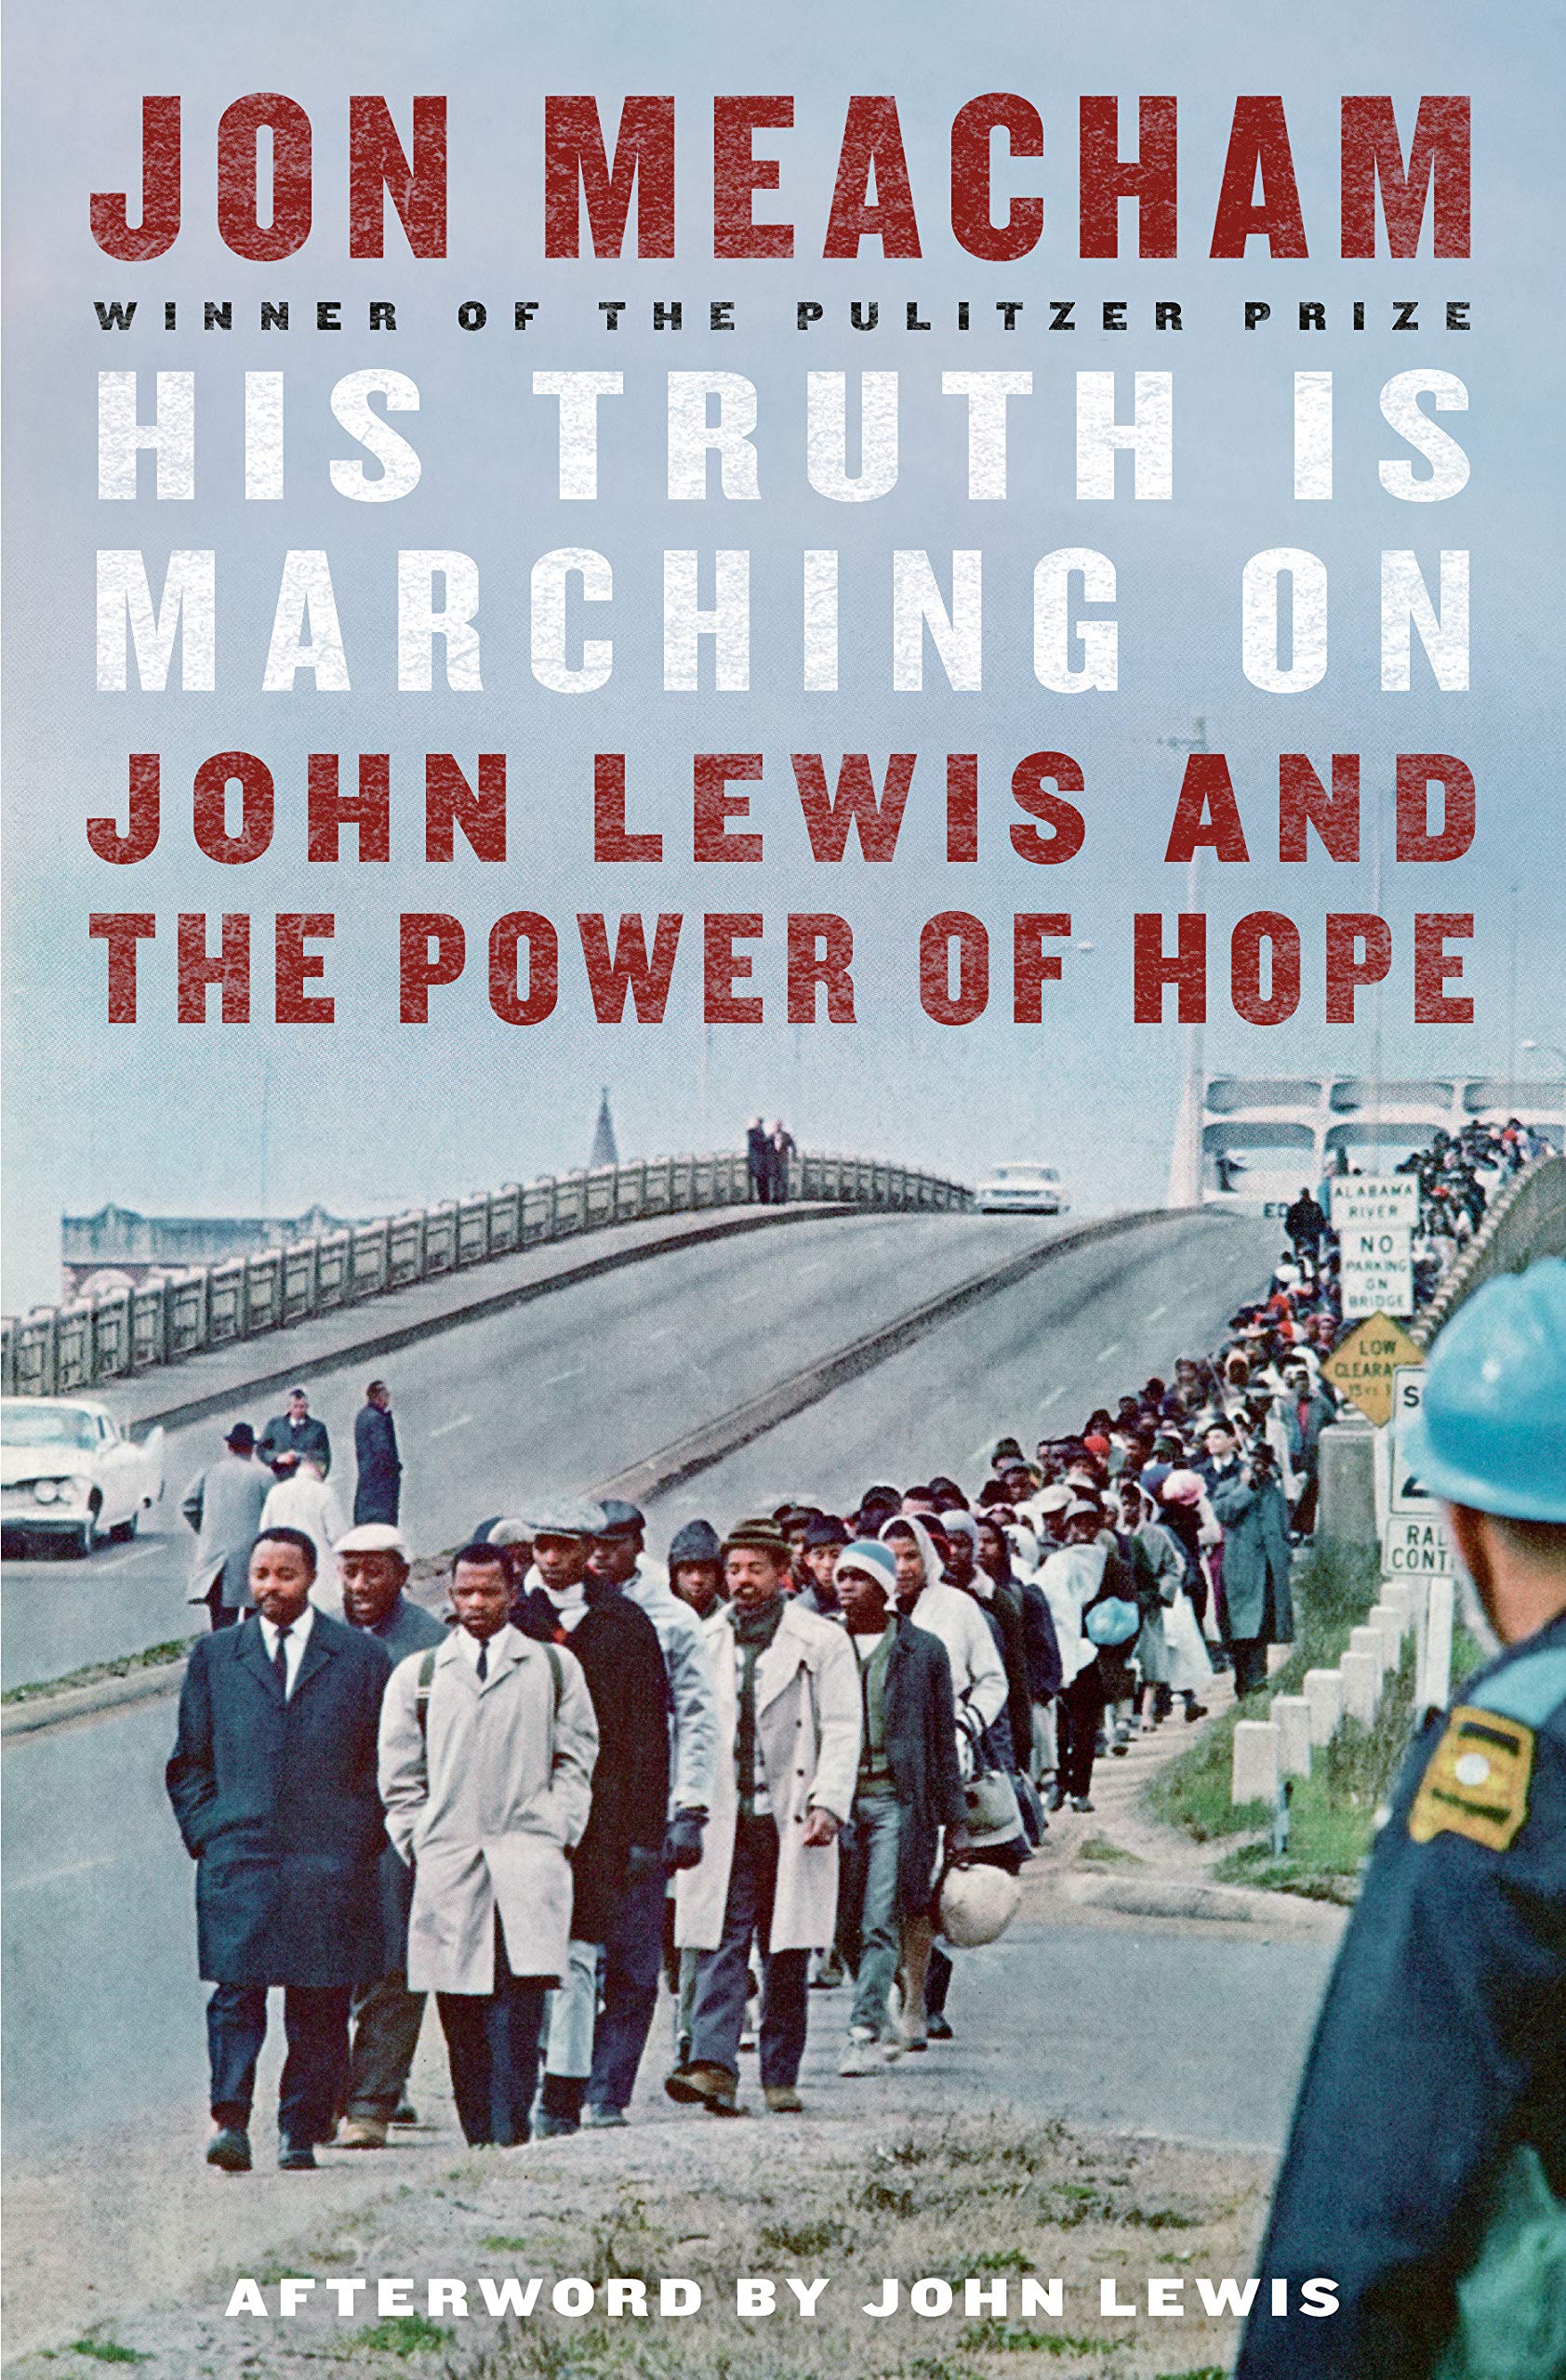 Cover of Jon Meacham's biography "His truth is marching on: John Lewis and the power of hope" with afterword by john lewis